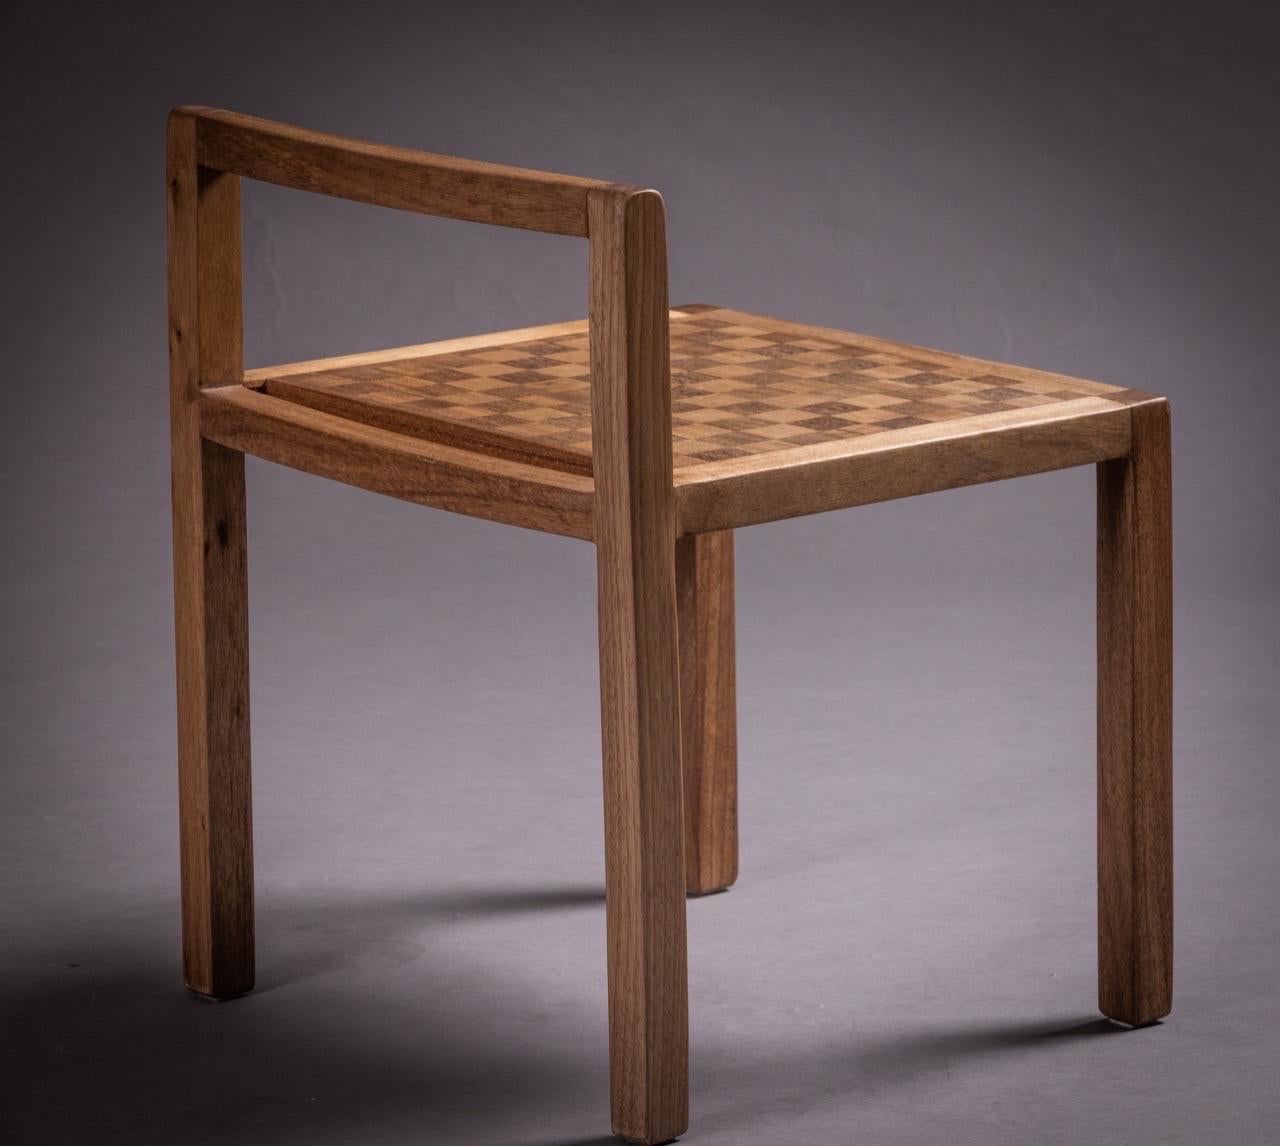 The charming Jojo stool features a checkered marquetry seat, skillfully crafted with the fine woods Jequitibá and Sucupira. Its sturdy structure is also made of high-quality Jequitibá, providing durability and elegance. Beyond its decorative